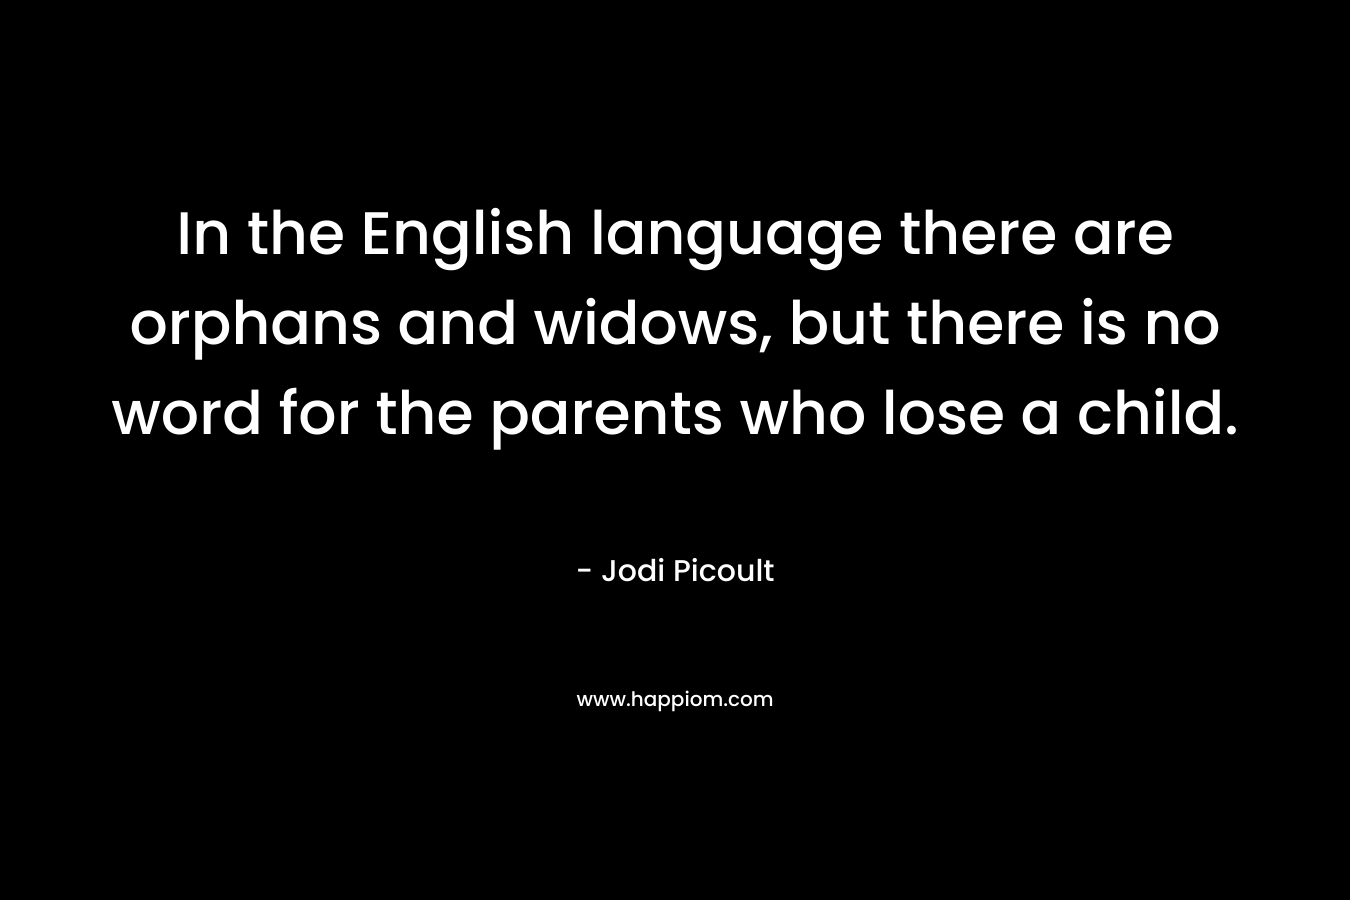 In the English language there are orphans and widows, but there is no word for the parents who lose a child.